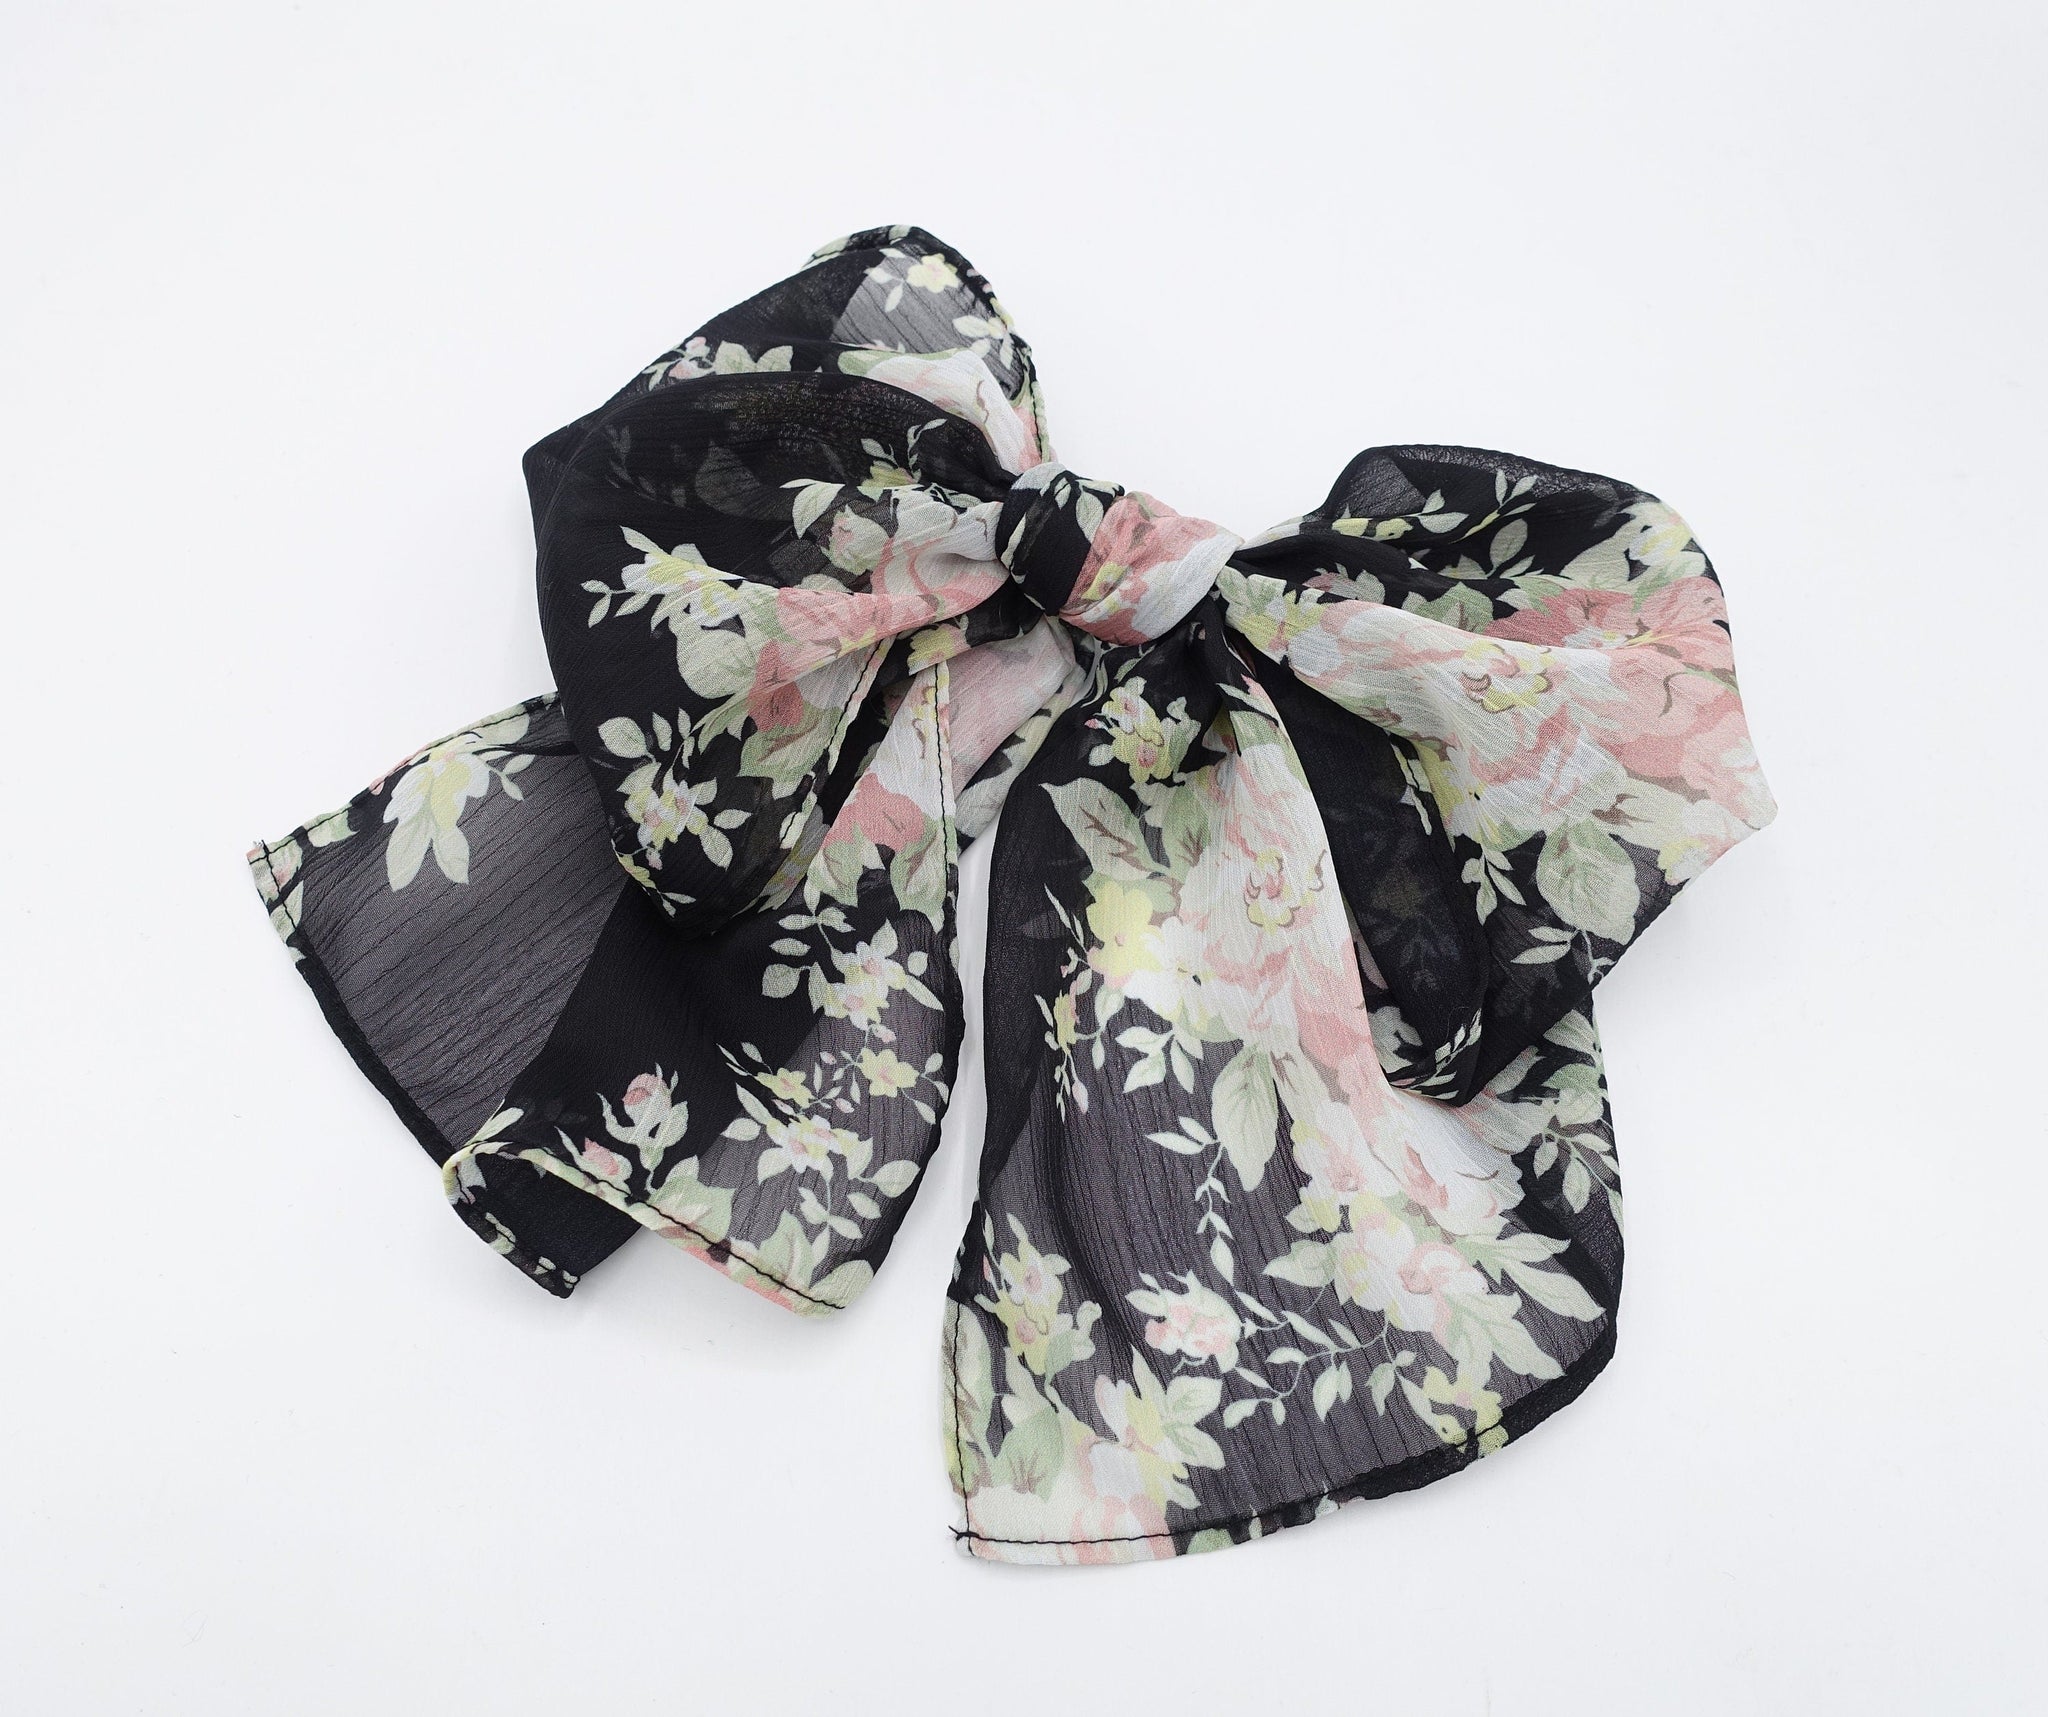 VeryShine Hair Accessories floral rolled hem chiffon hair bow barrette accessory for women